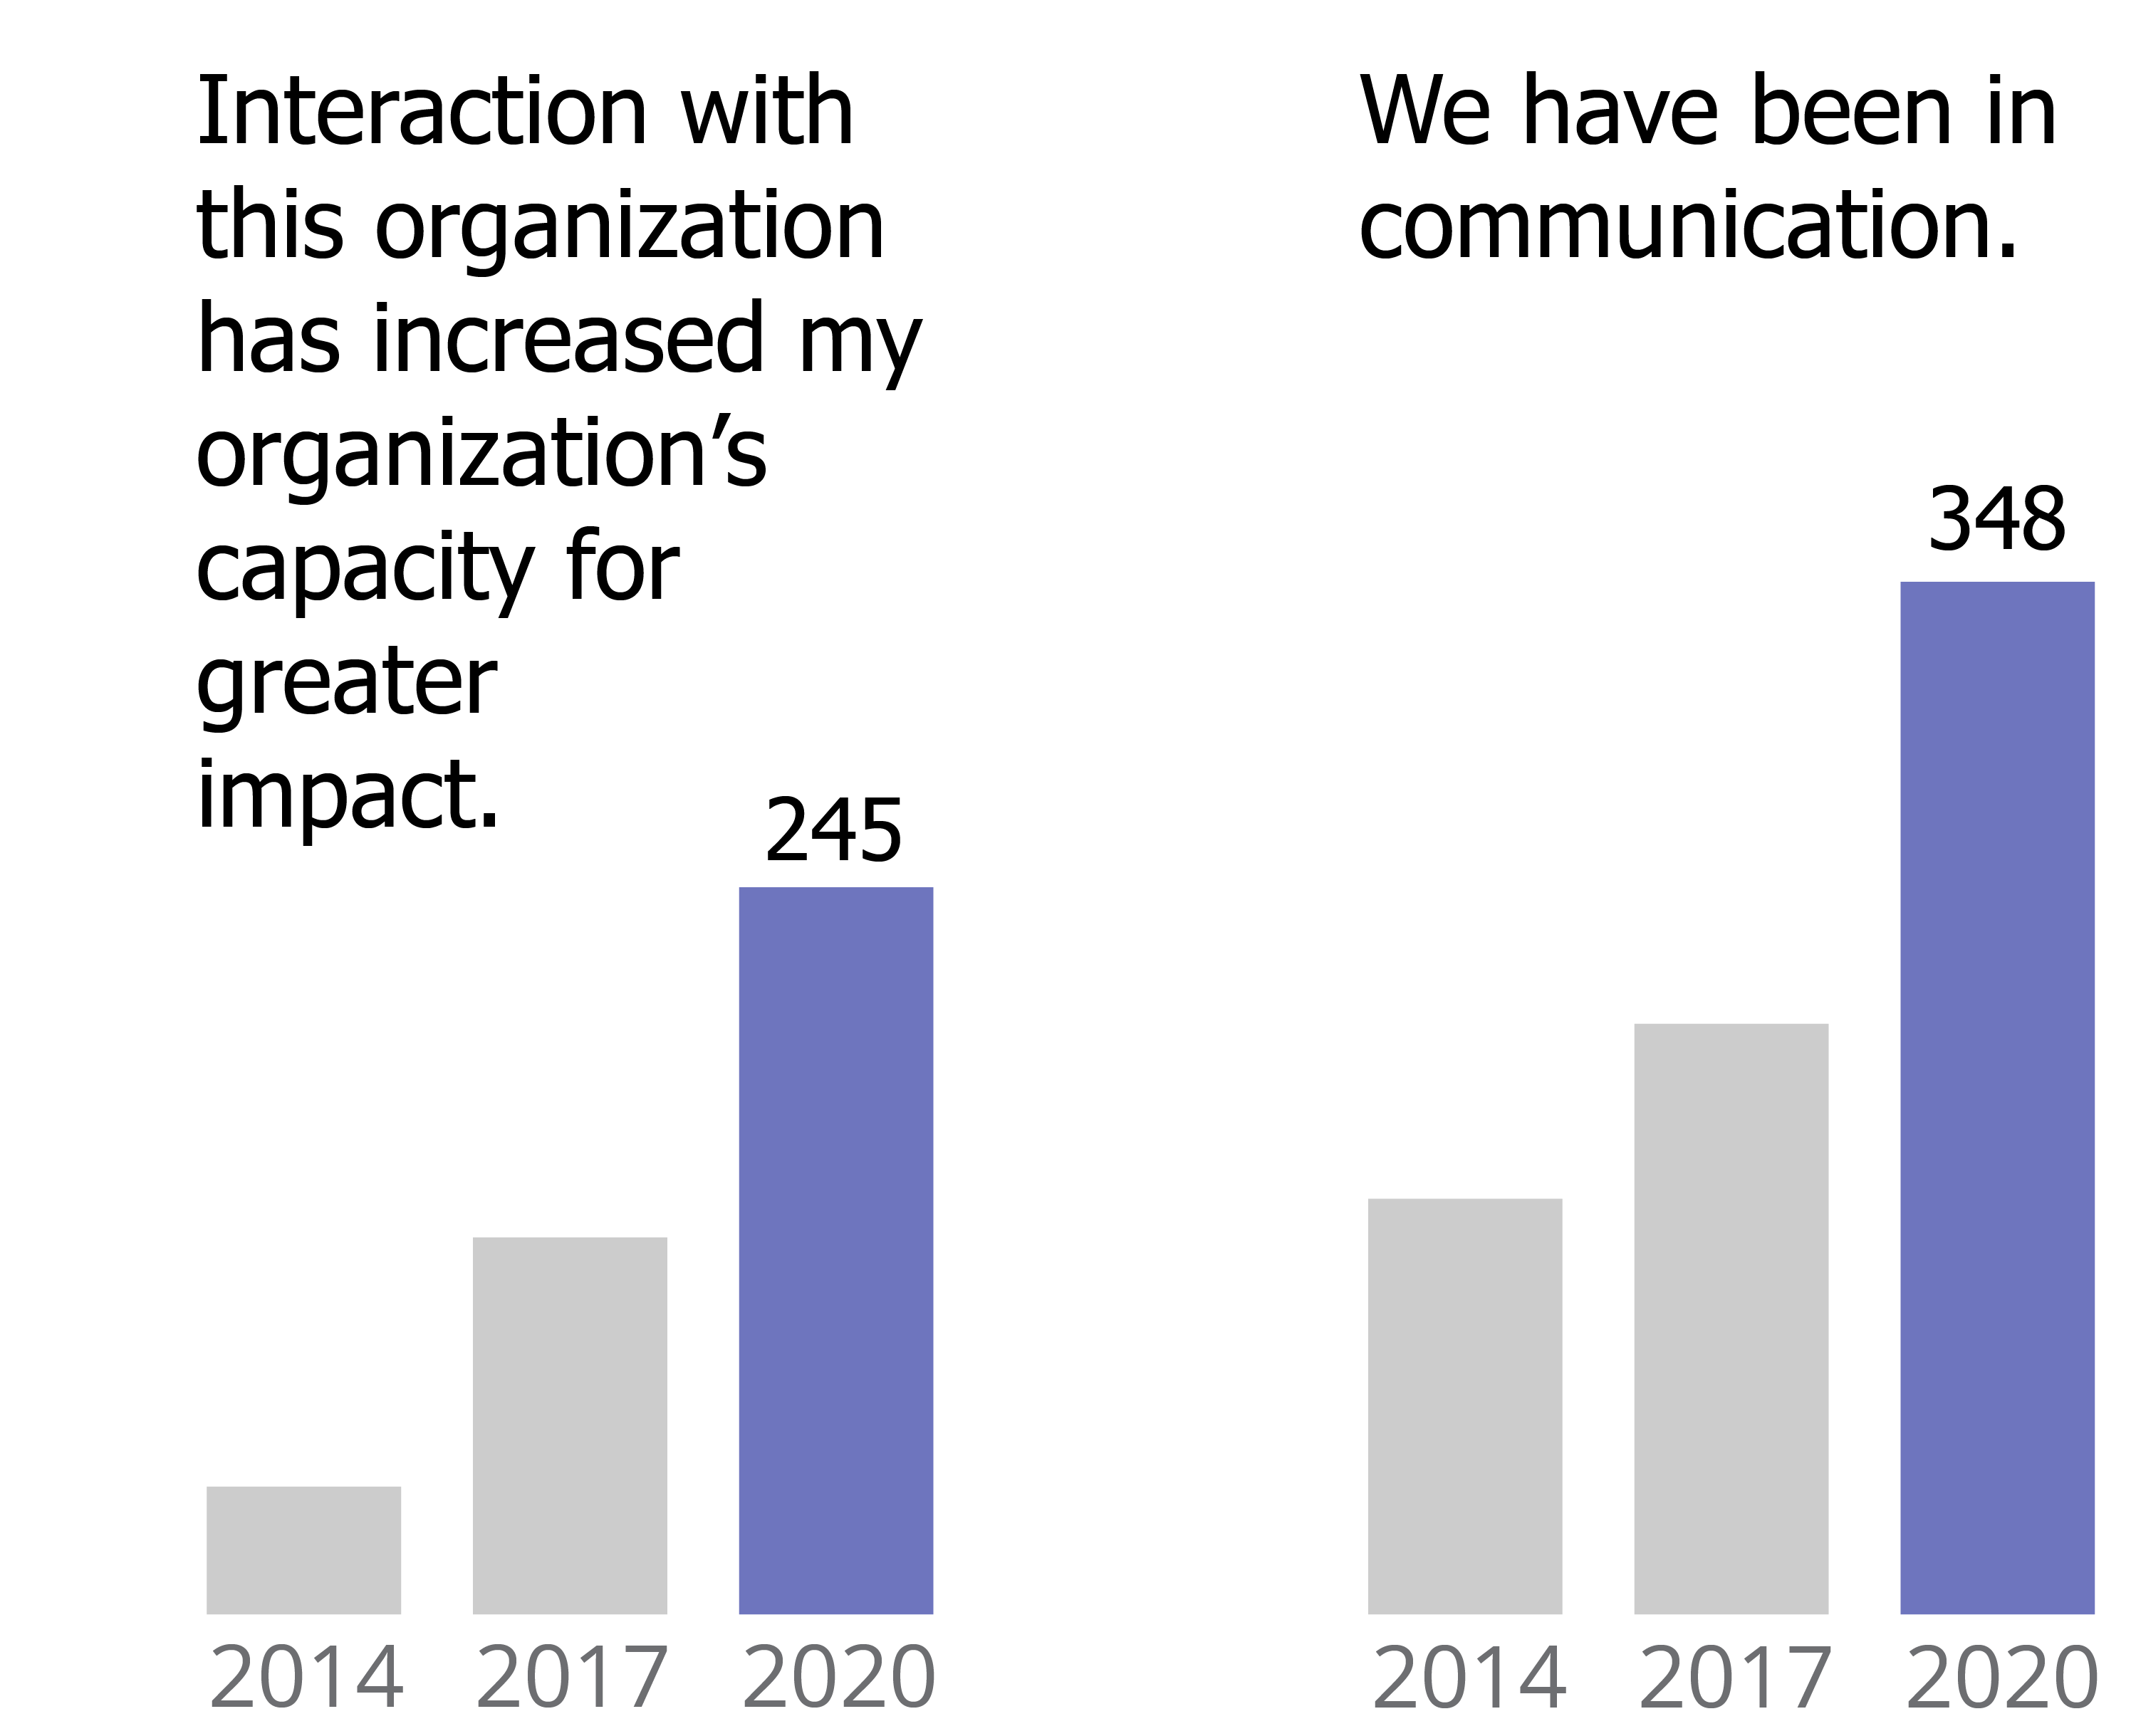 245 organizations reported increased capacity for greater impact after interacting with another organization in 2020, compared to 43 in 2014. 348 organizations reported being in communication with another organization in 2020, compared to 140 in 2014.